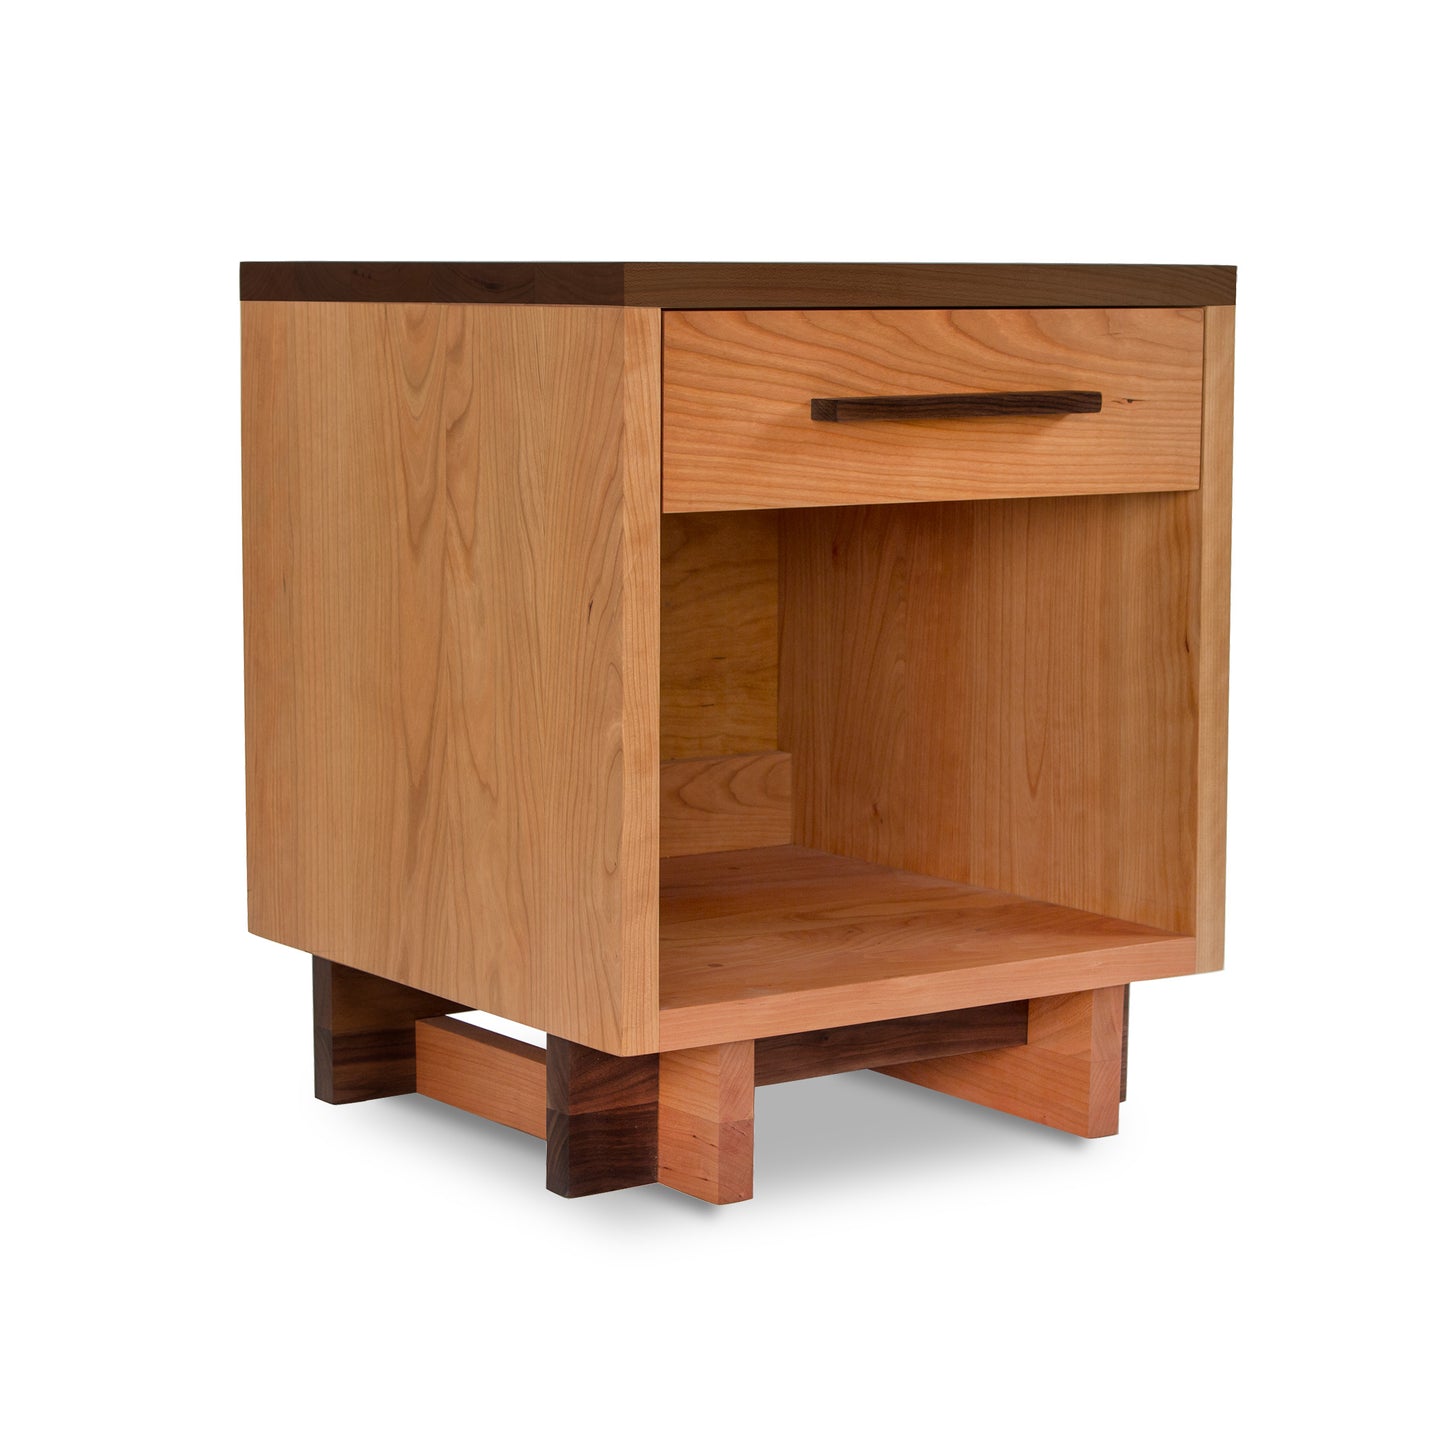 A Modern American 1-Drawer Enclosed Shelf Nightstand by Vermont Furniture Designs, featuring an open shelf and a single drawer, set against a white background. The stand has a simple, modern design with visible wood grain.